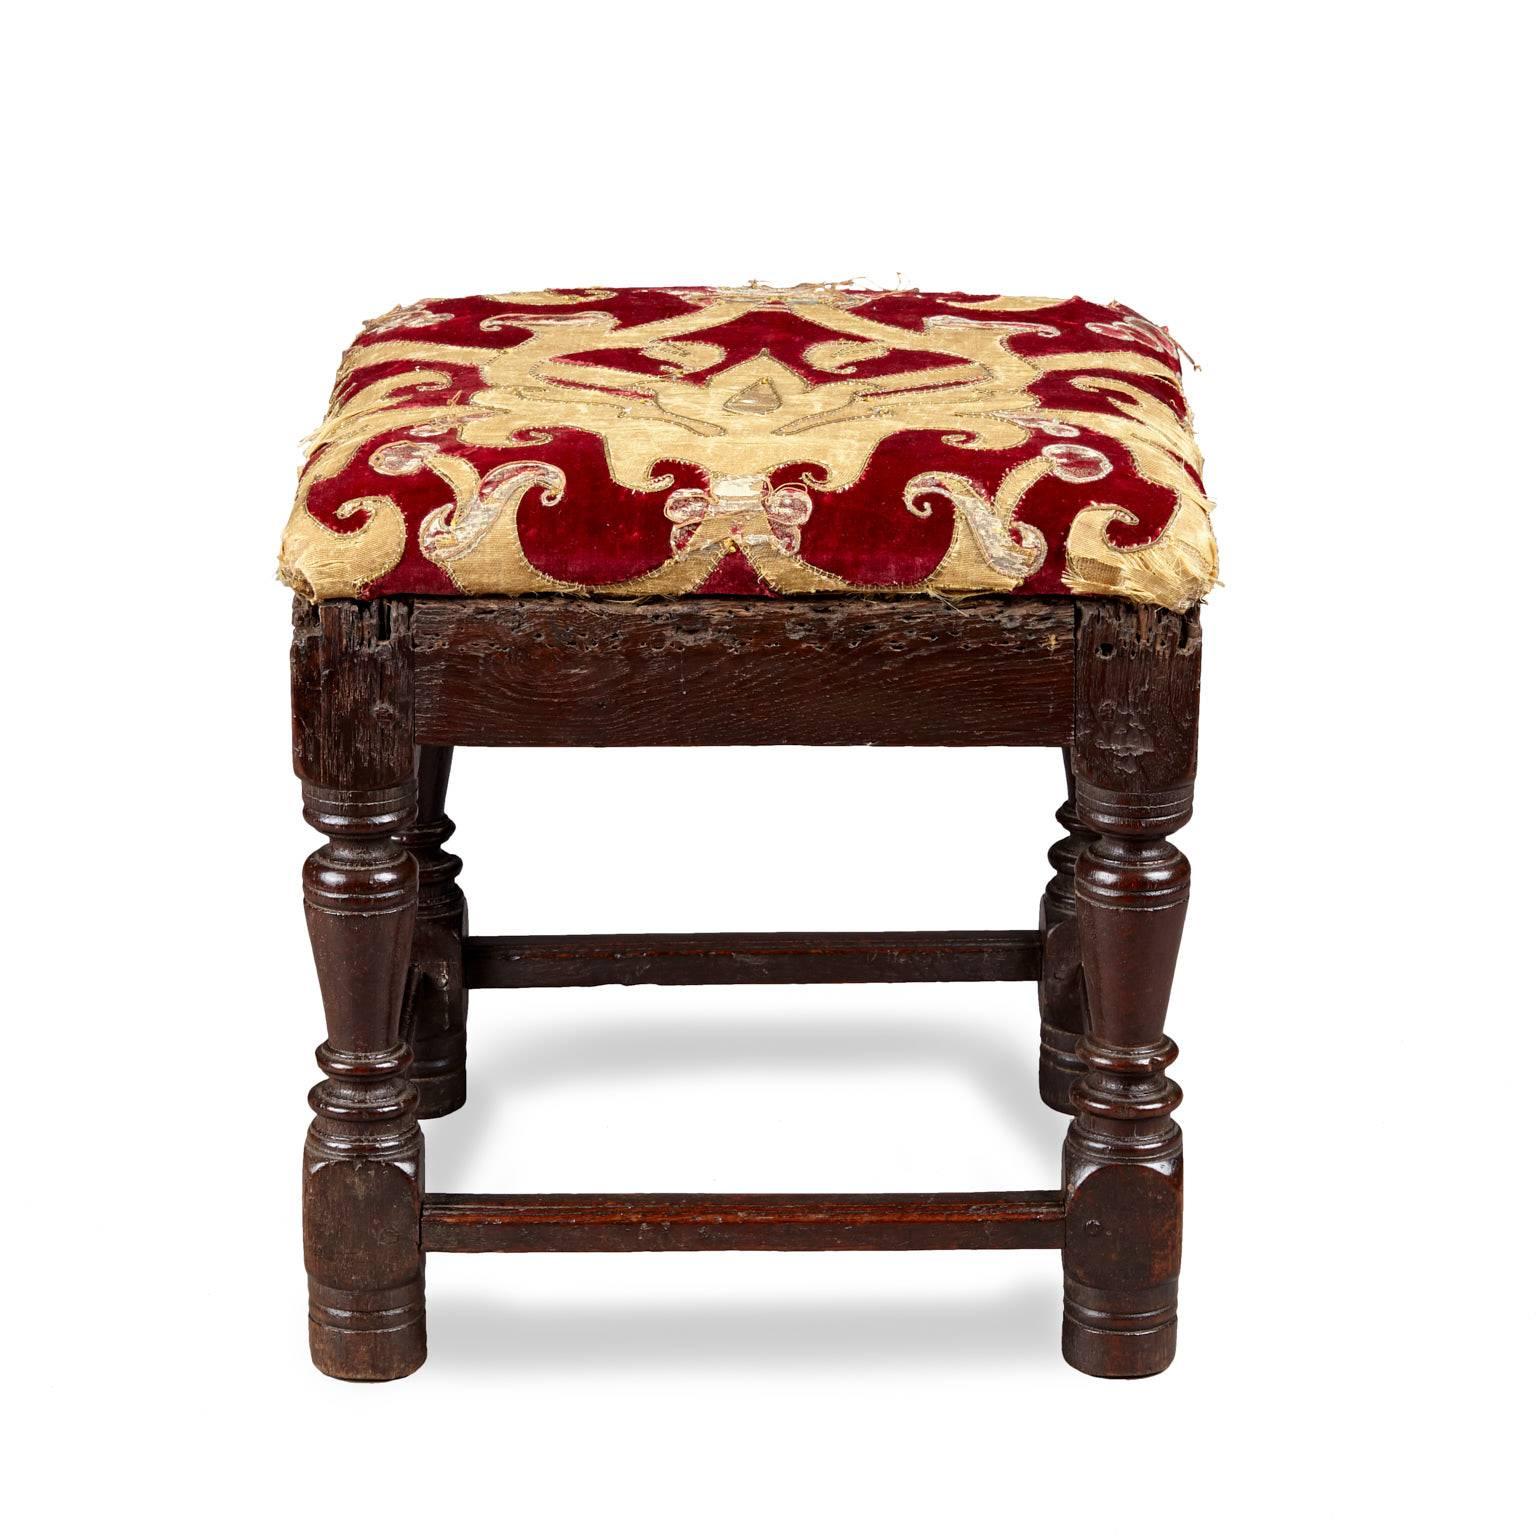 Late Elizabethan upholstered low joined stool

The square frame with inverted baluster turned legs on original high ring turned toes, joined by plain side rails with signs of previous upholstery, the lower frame with high flat moulded stretchers.